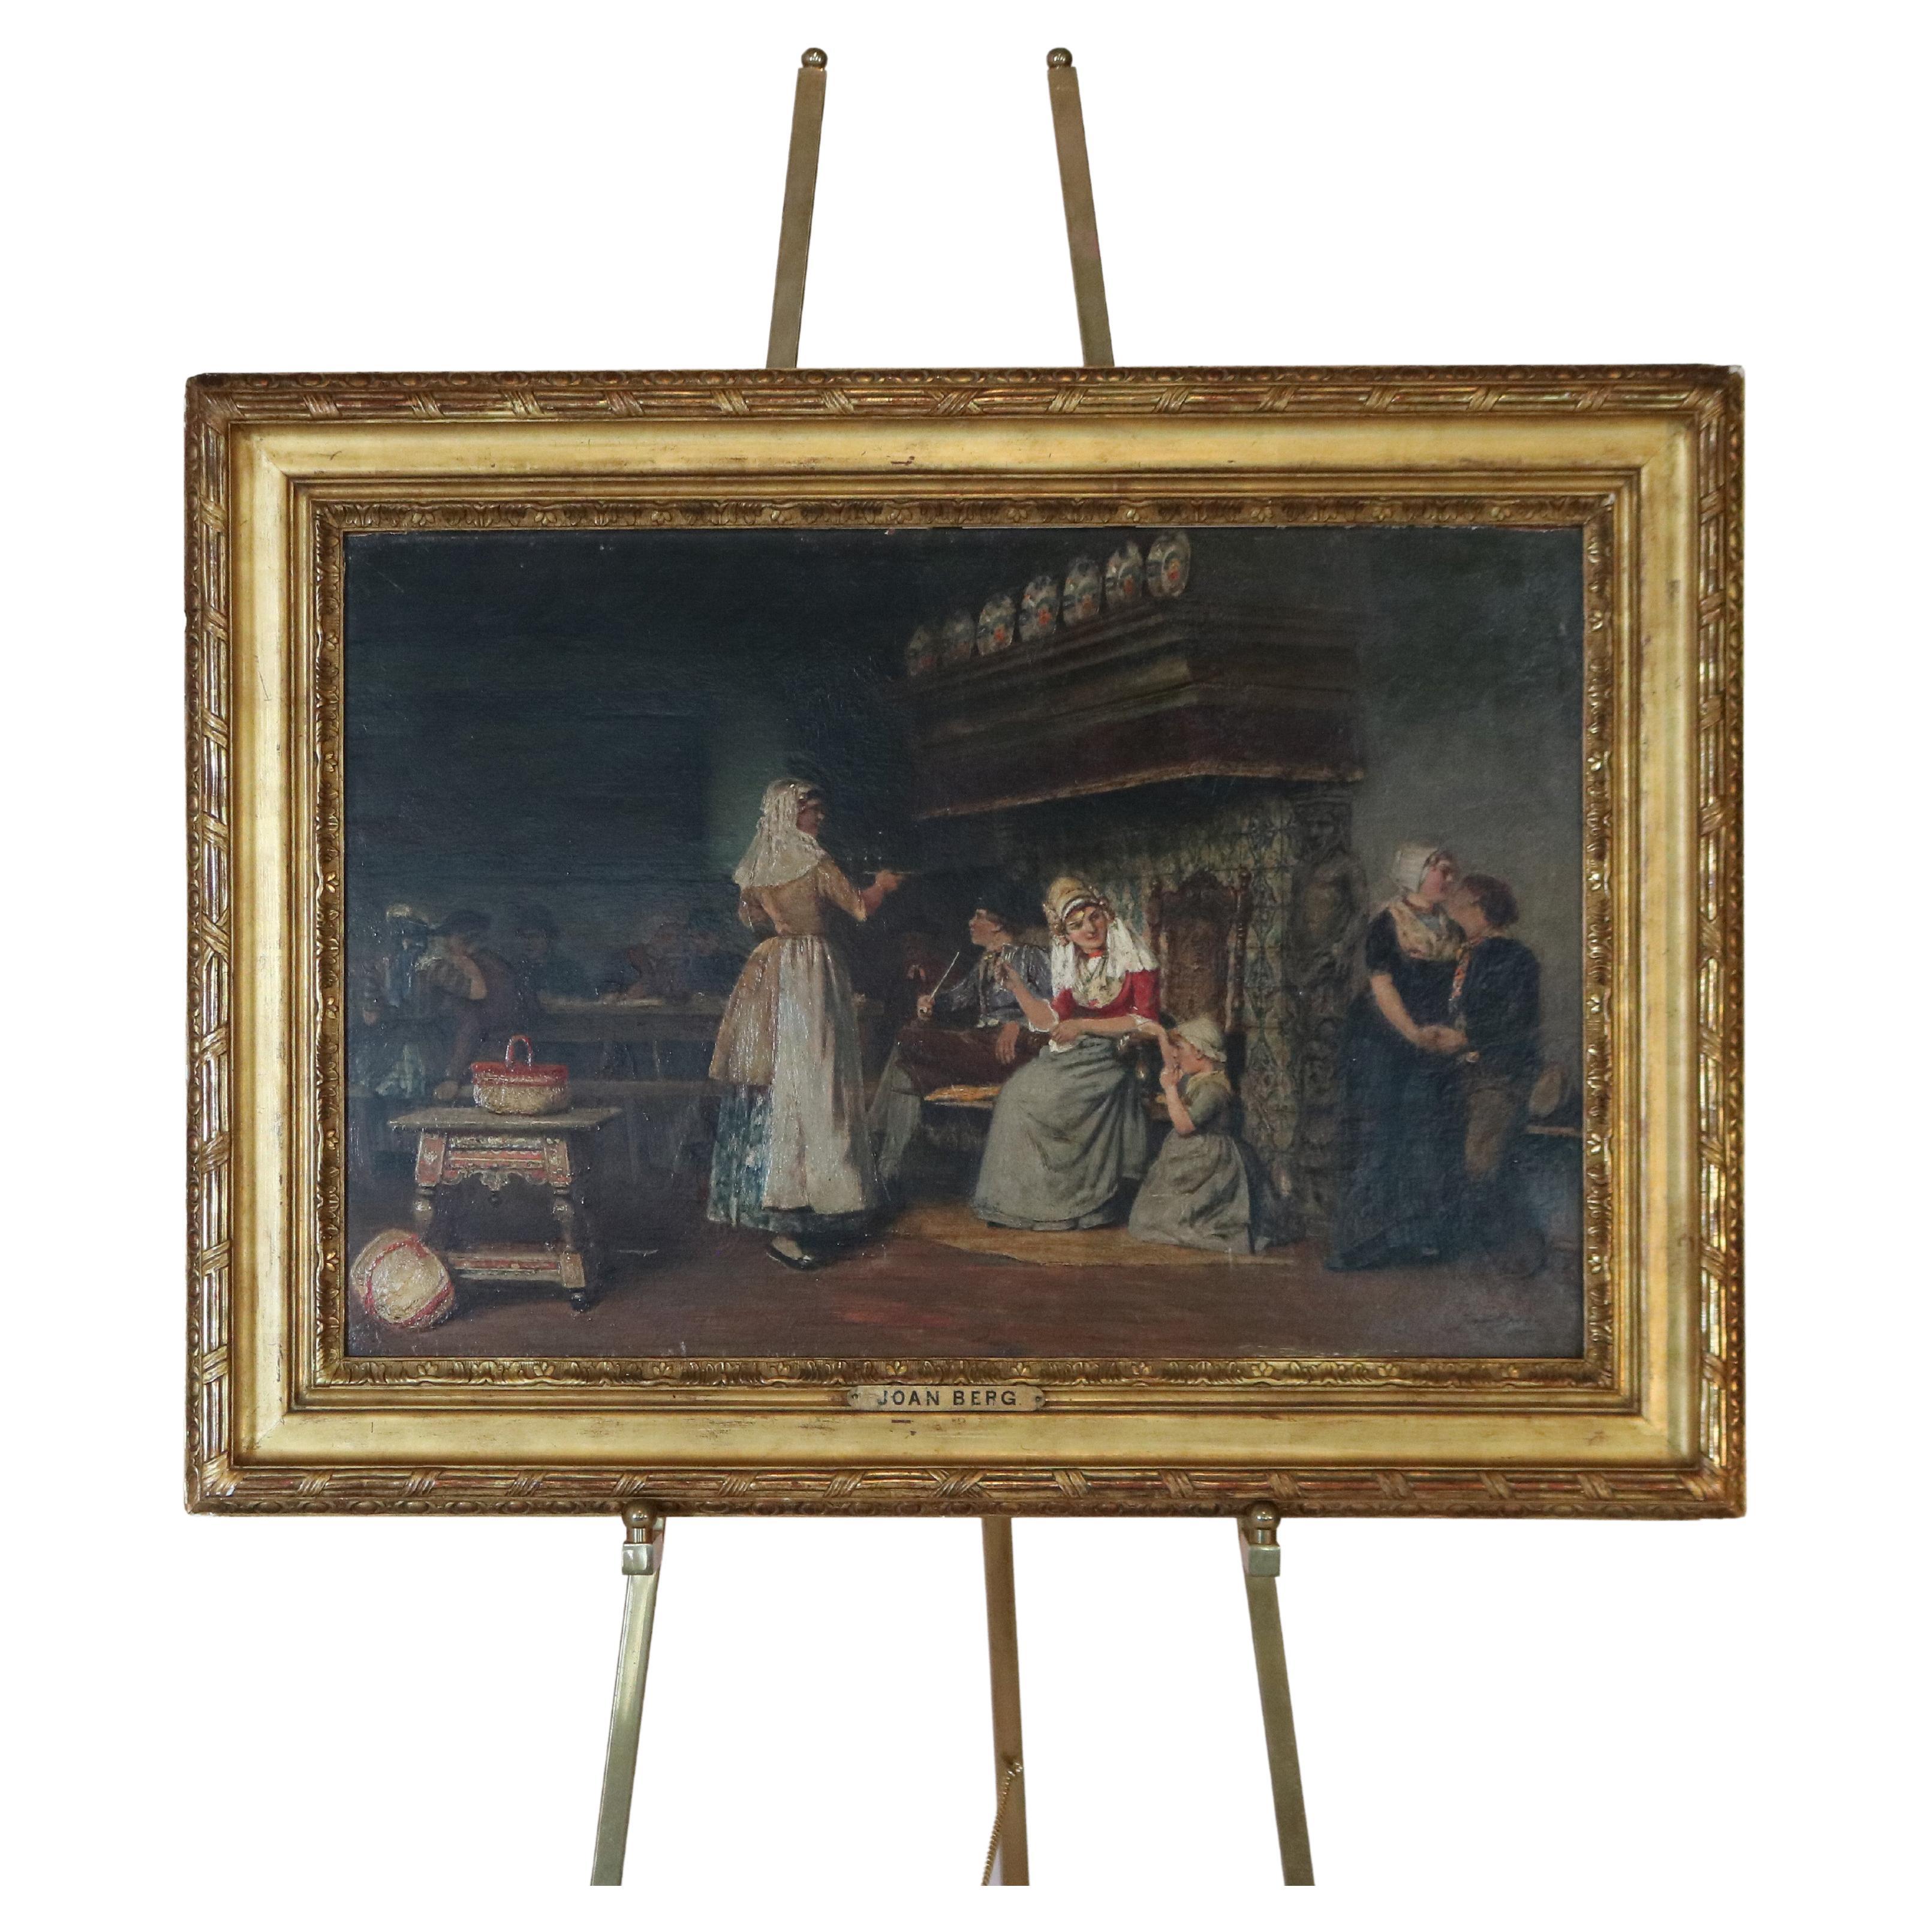 Antique French Oil Painting of a Genre Tavern Scene Signed Joan Berg 19th C